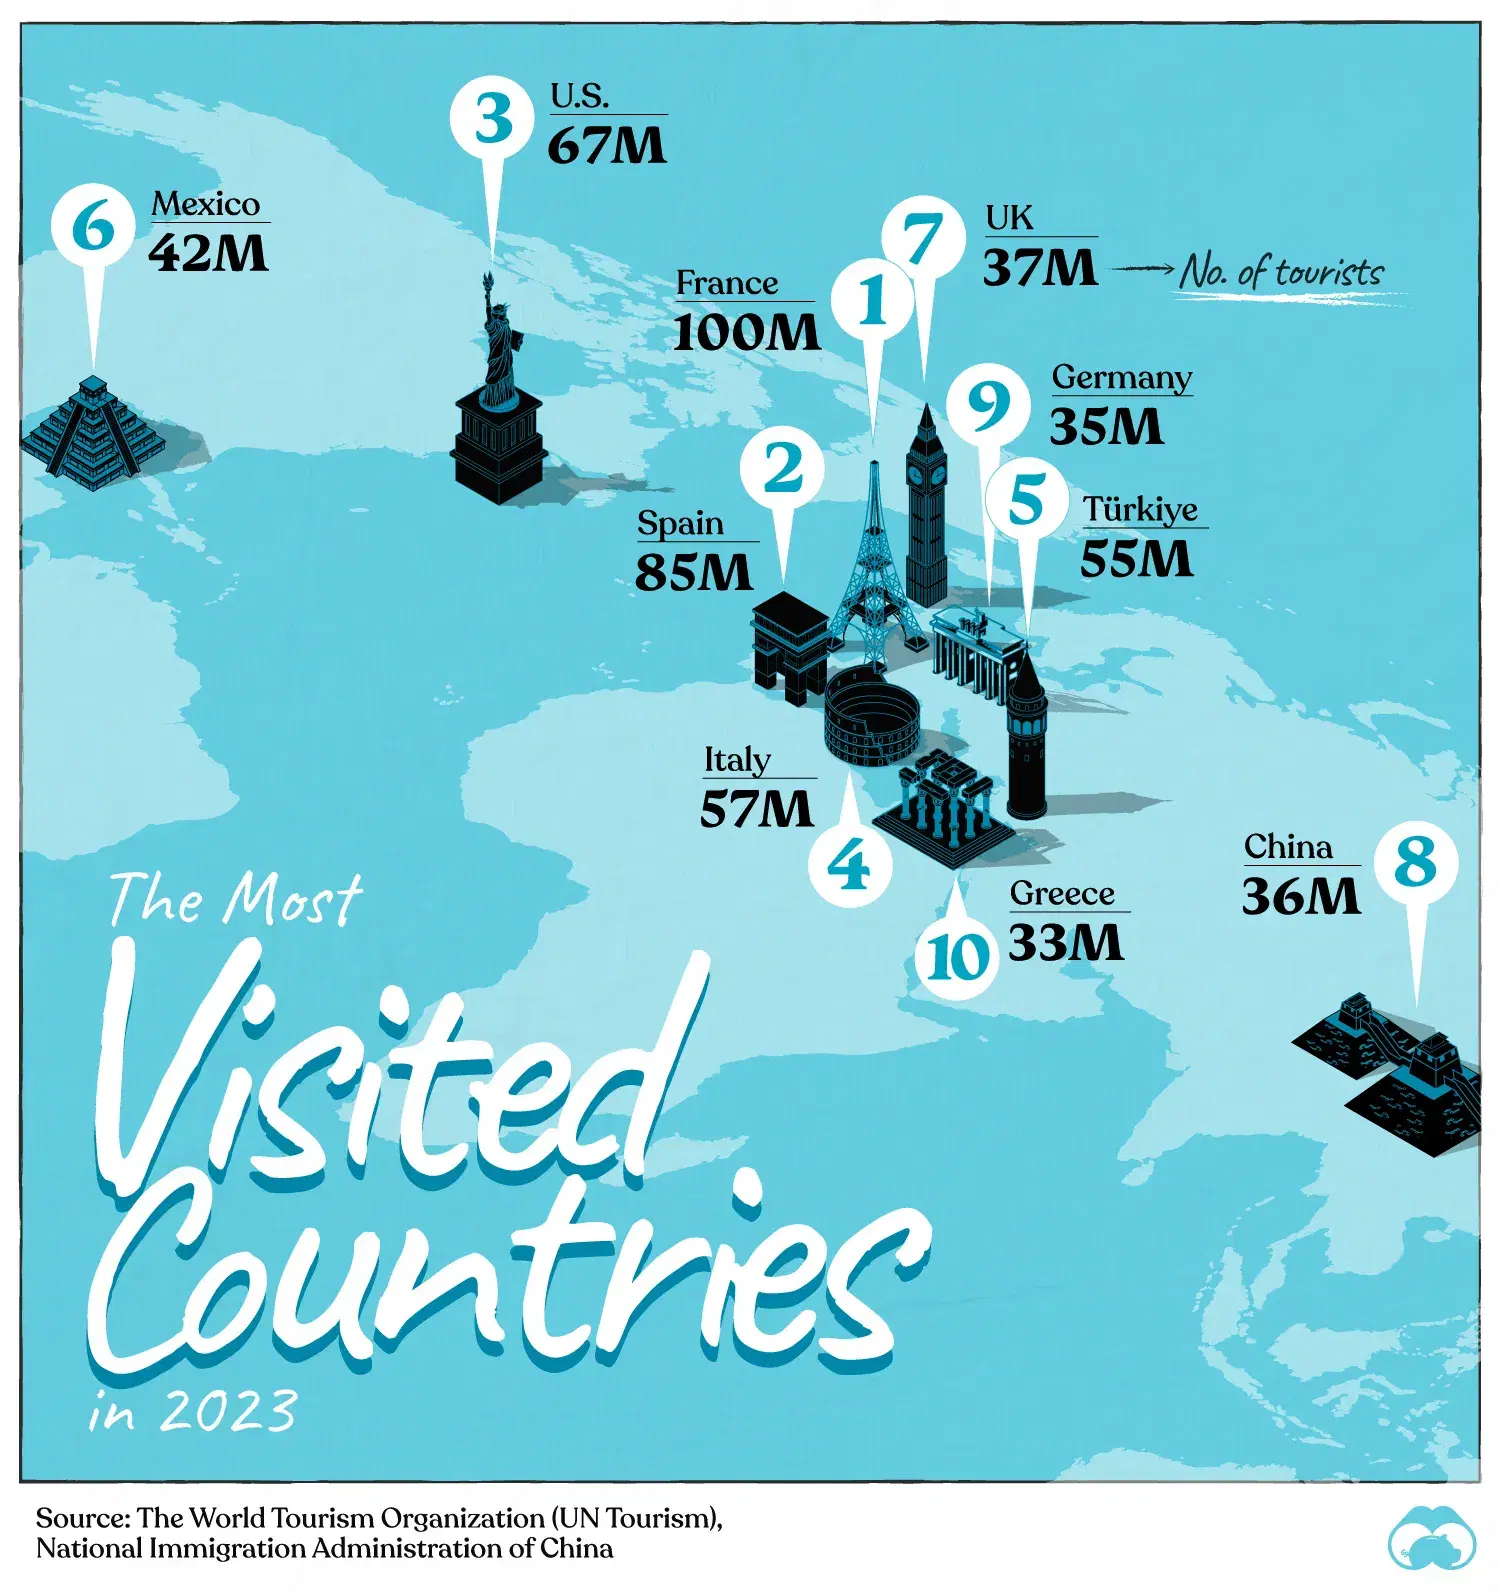 France is the Most Visited Country, With Over 100 Million Tourists per Year